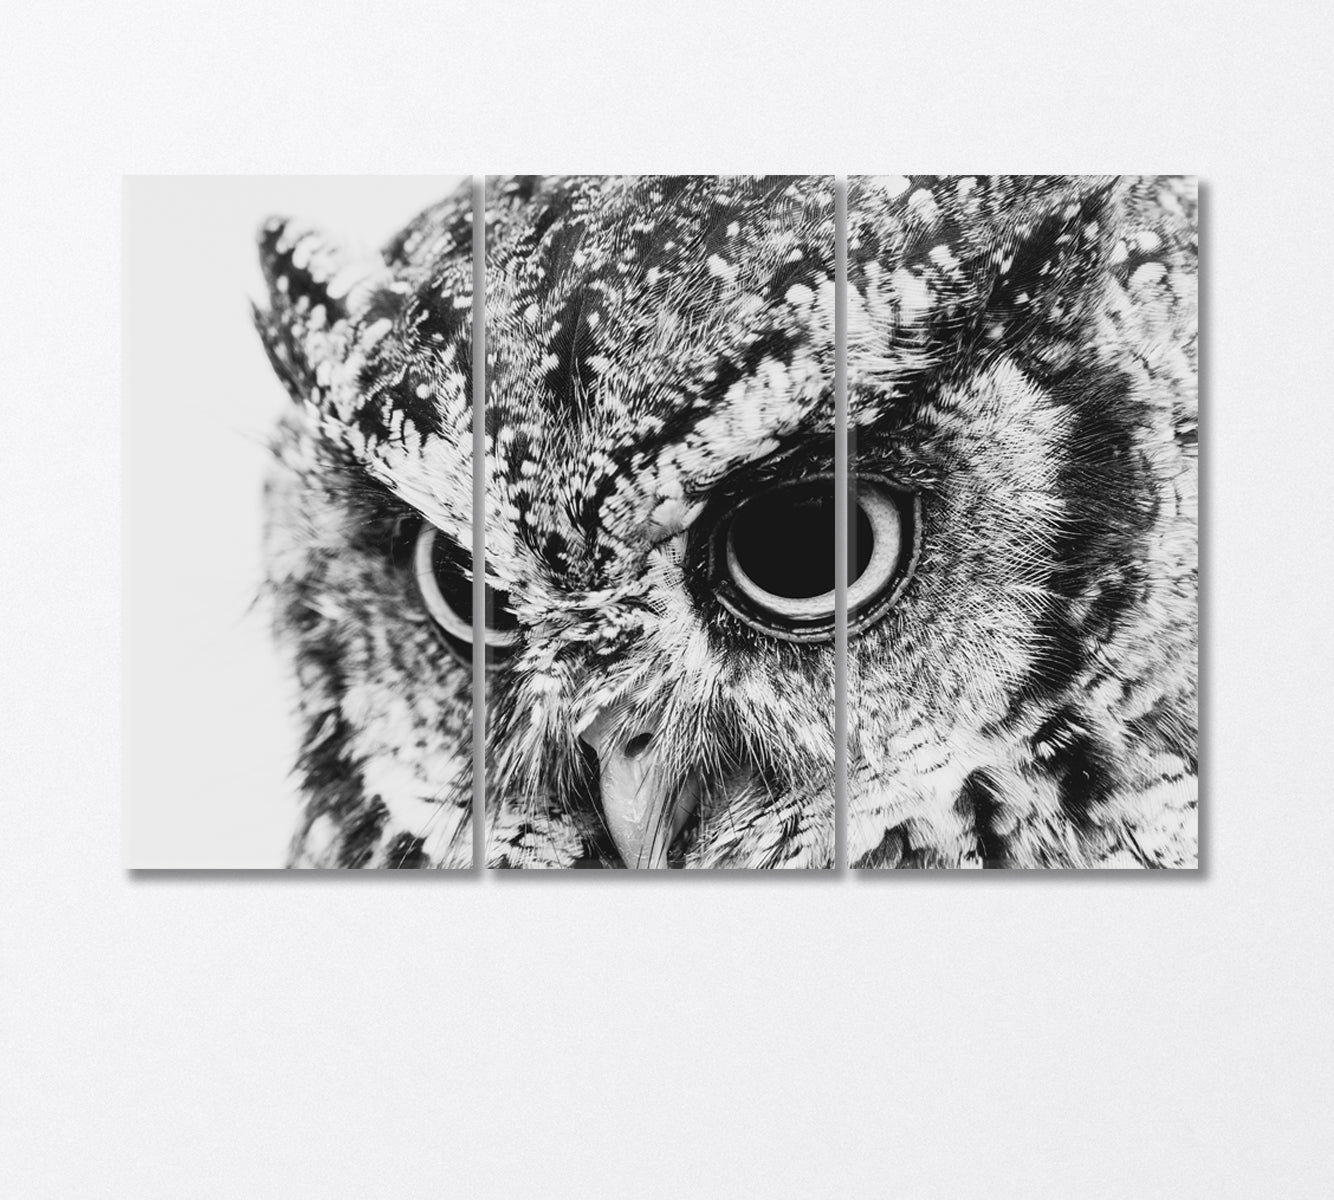 Wild Owl in Black and White Canvas Print-Canvas Print-CetArt-3 Panels-36x24 inches-CetArt